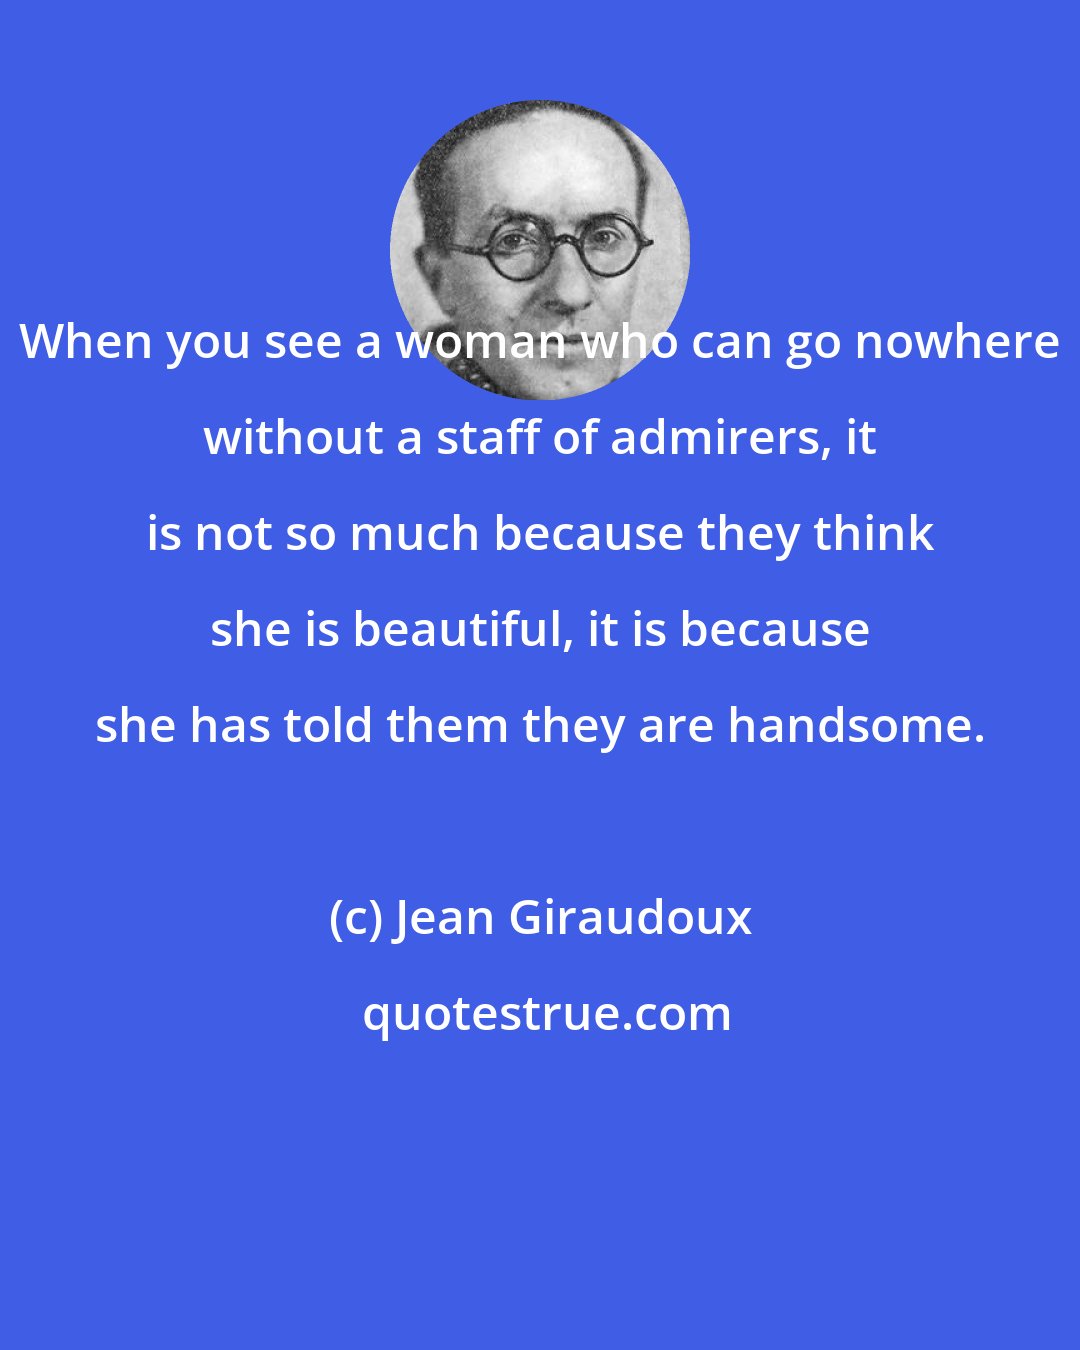 Jean Giraudoux: When you see a woman who can go nowhere without a staff of admirers, it is not so much because they think she is beautiful, it is because she has told them they are handsome.